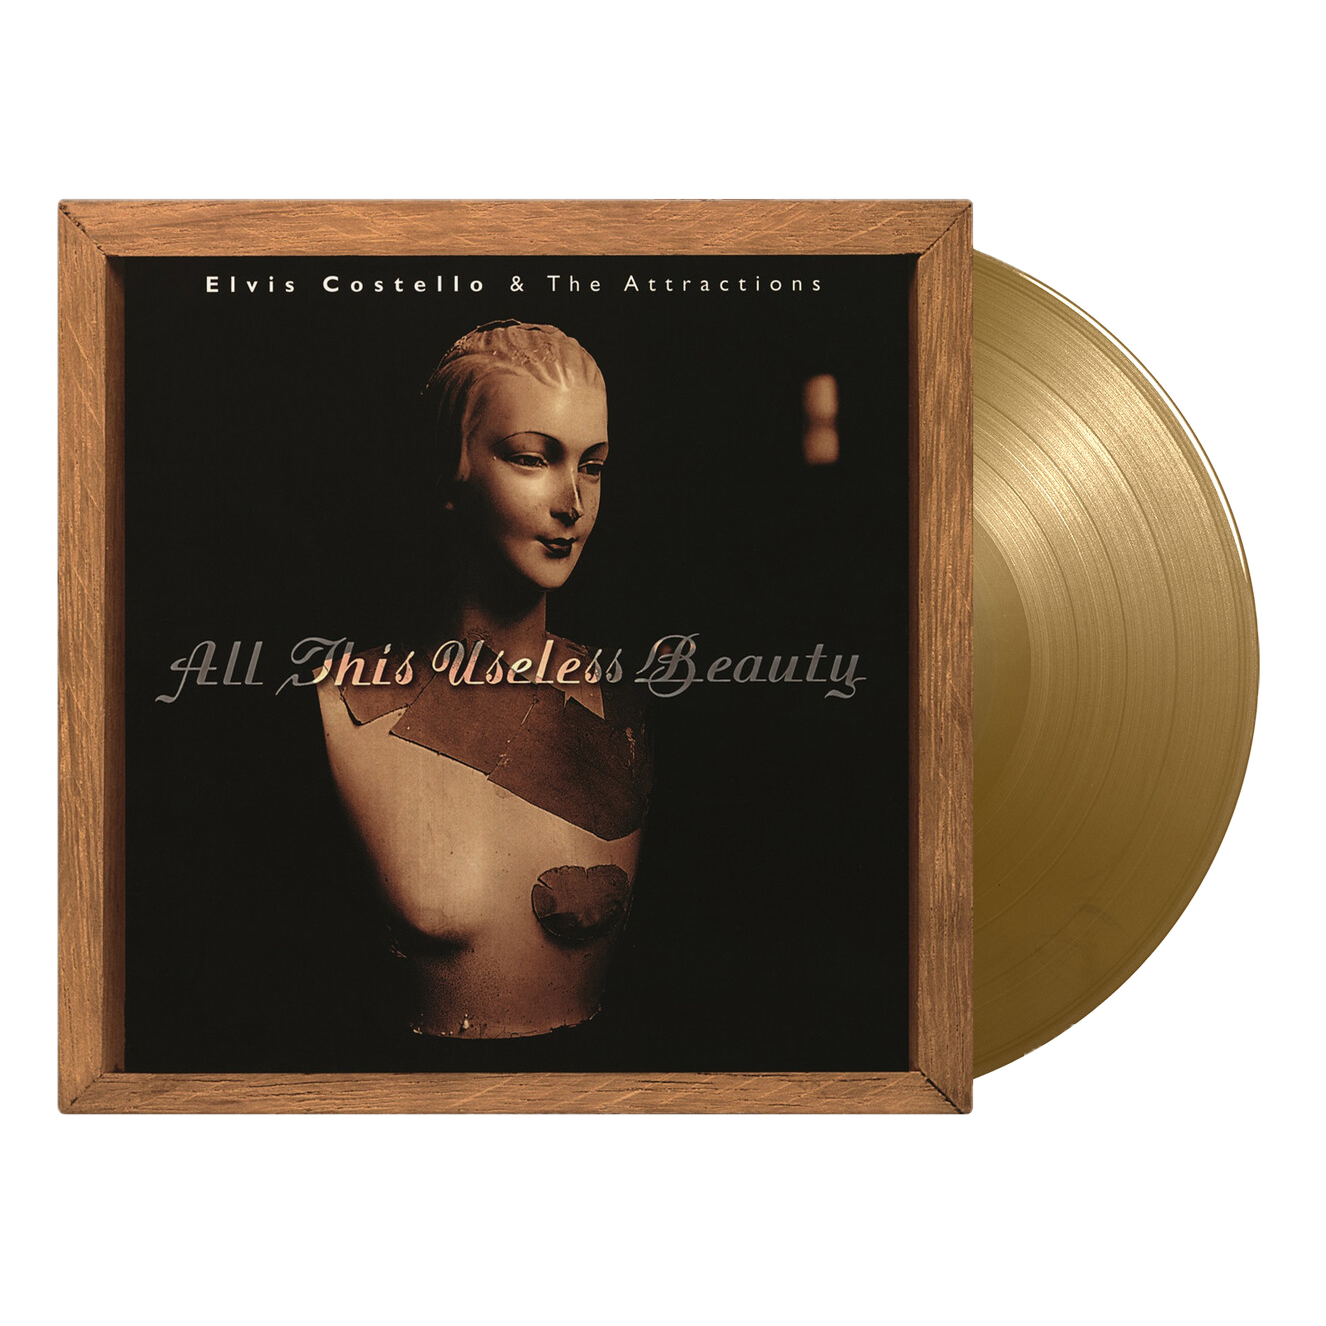 Elvis Costello & The Attractions - All This Useless Beauty: Limited Edition Gold Vinyl LP